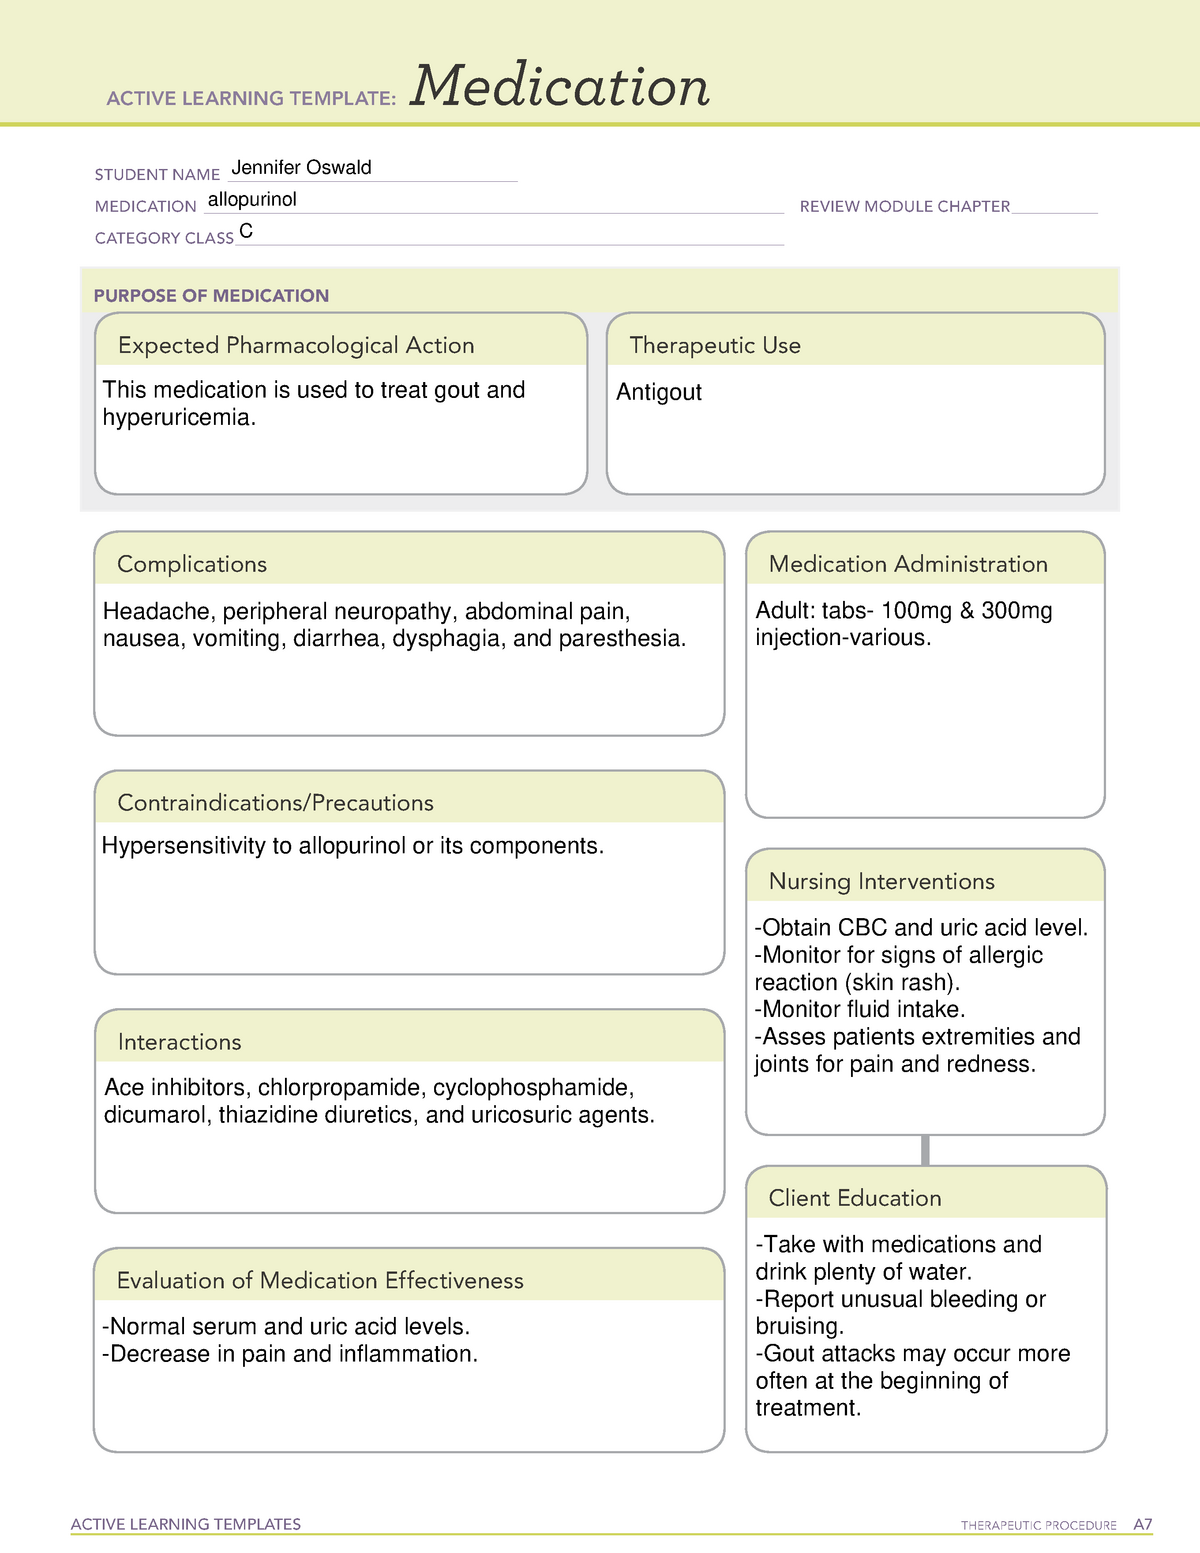 allopurinol-ati-med-template-active-learning-templates-therapeutic